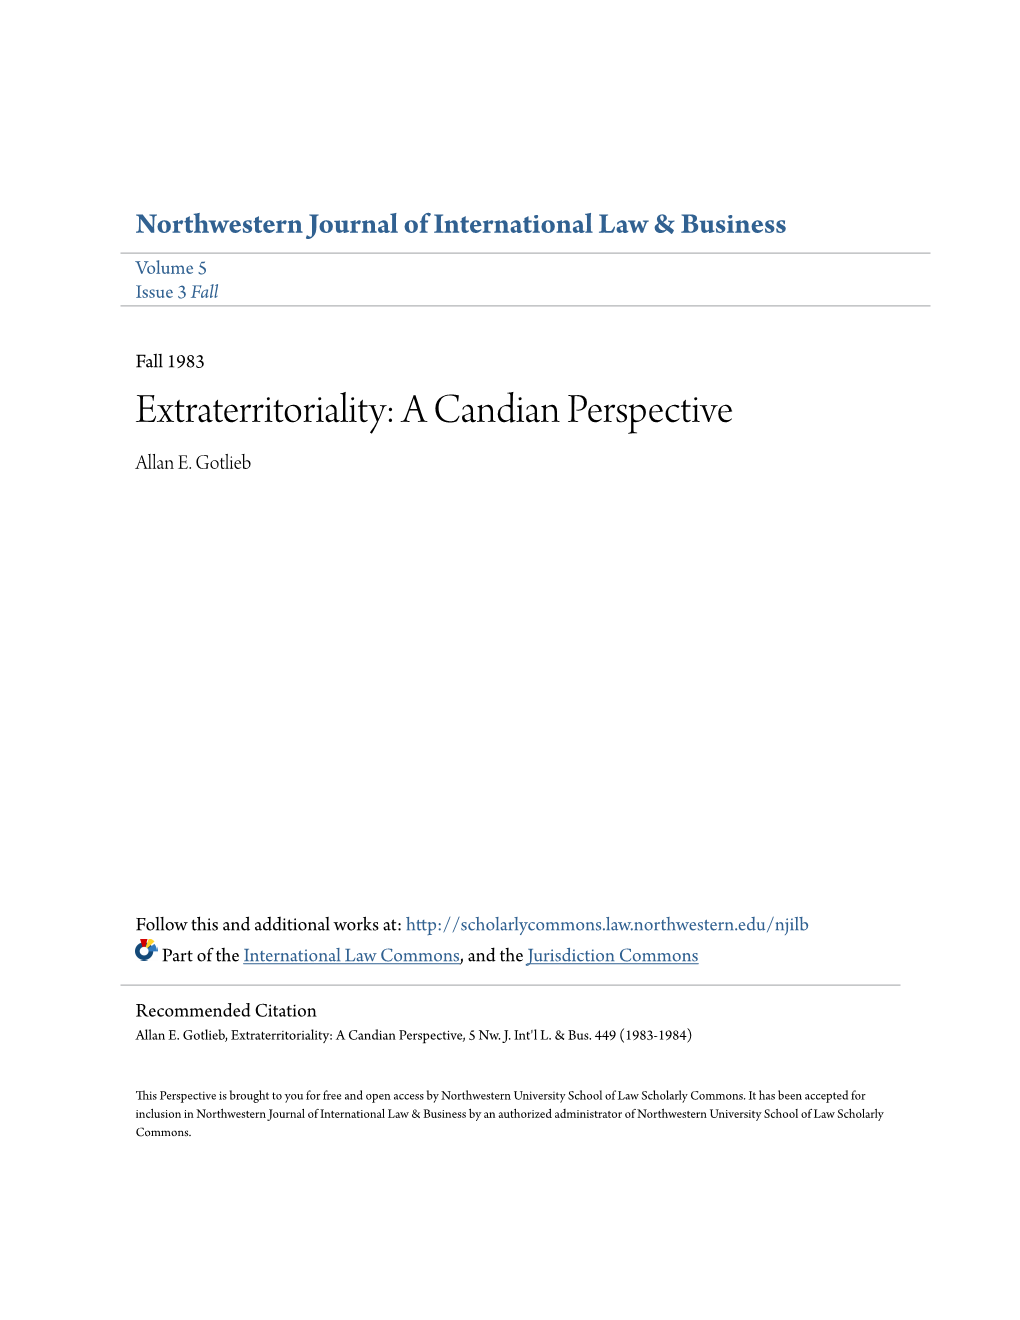 Extraterritoriality: a Candian Perspective Allan E